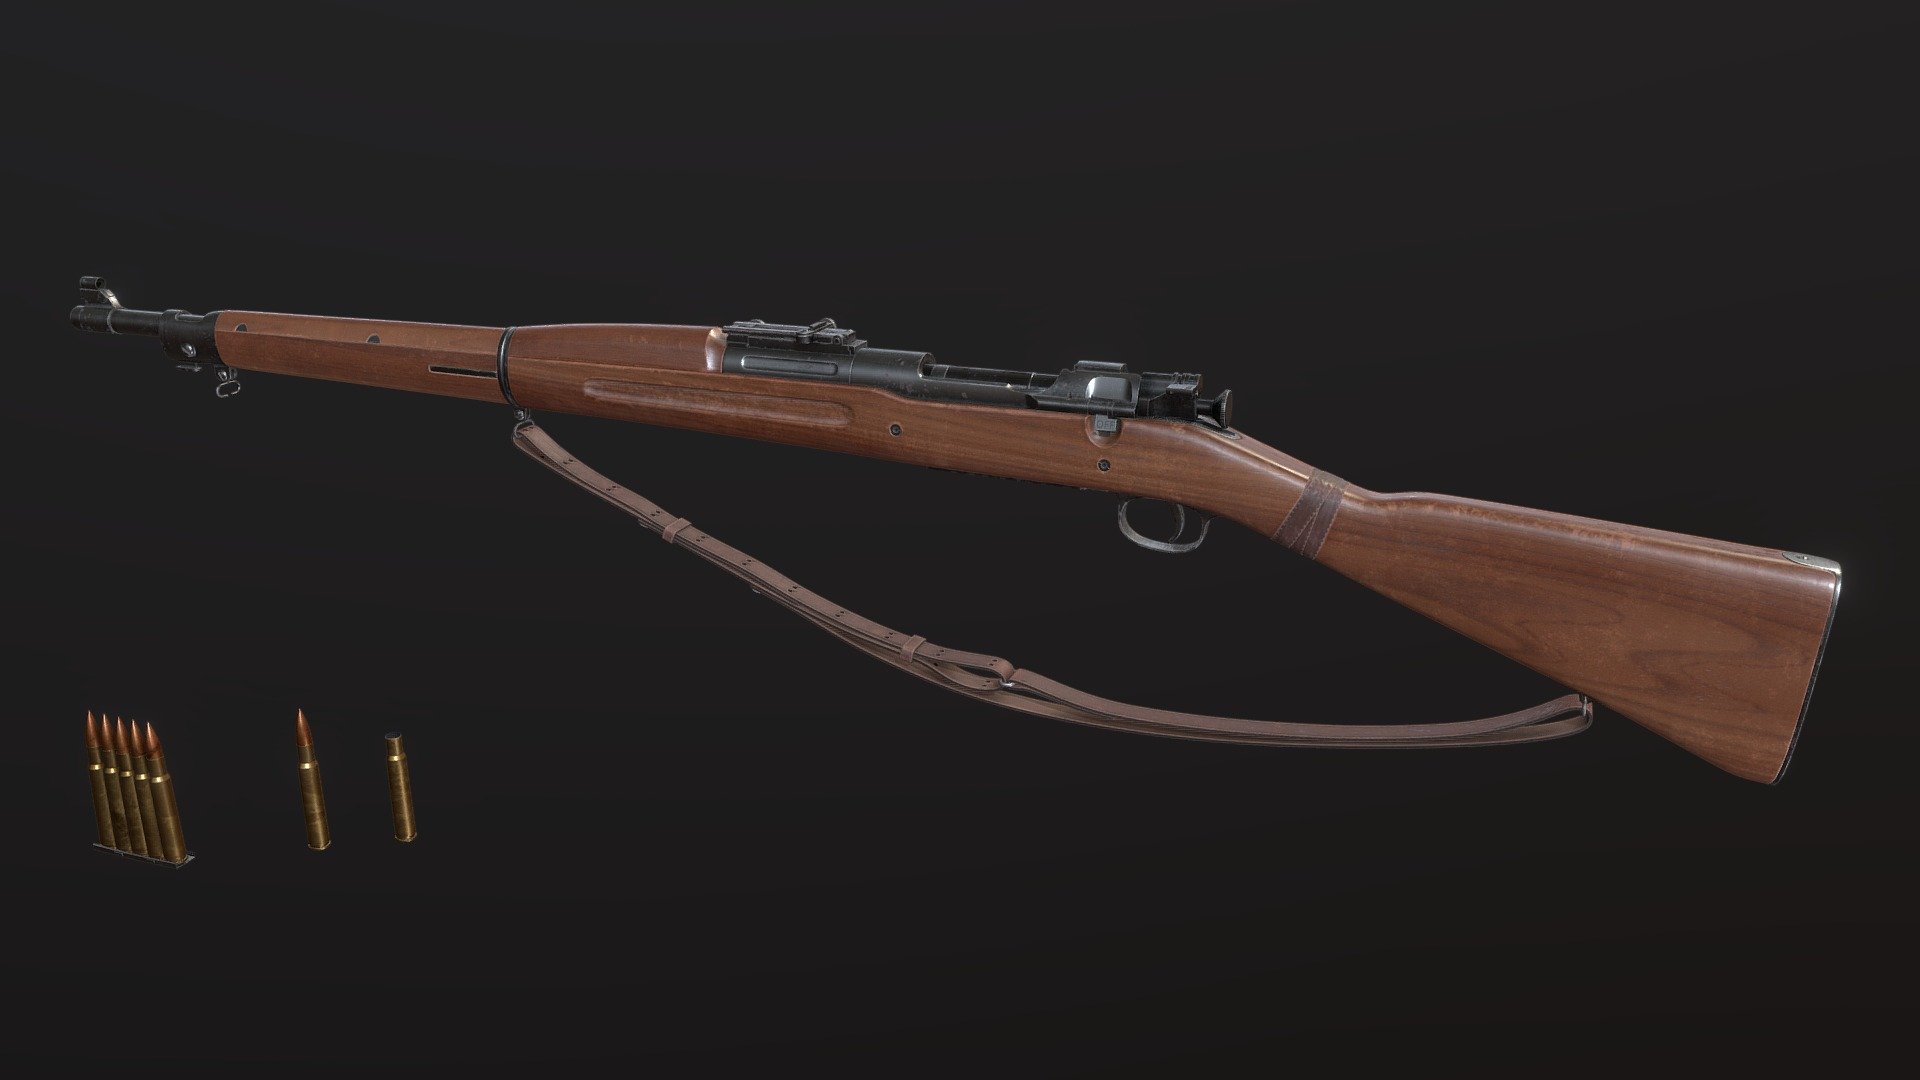 m1903 springfield rifle model high poly.

Subdiv ready topology with bevel on edges and quad polygons.

Textures:

PBR Metall/Roughness
Two 4k sets for metall and wood parts
One 2k set for strap - m1903 springfield high-poly - 3D model by drbanana 3d model